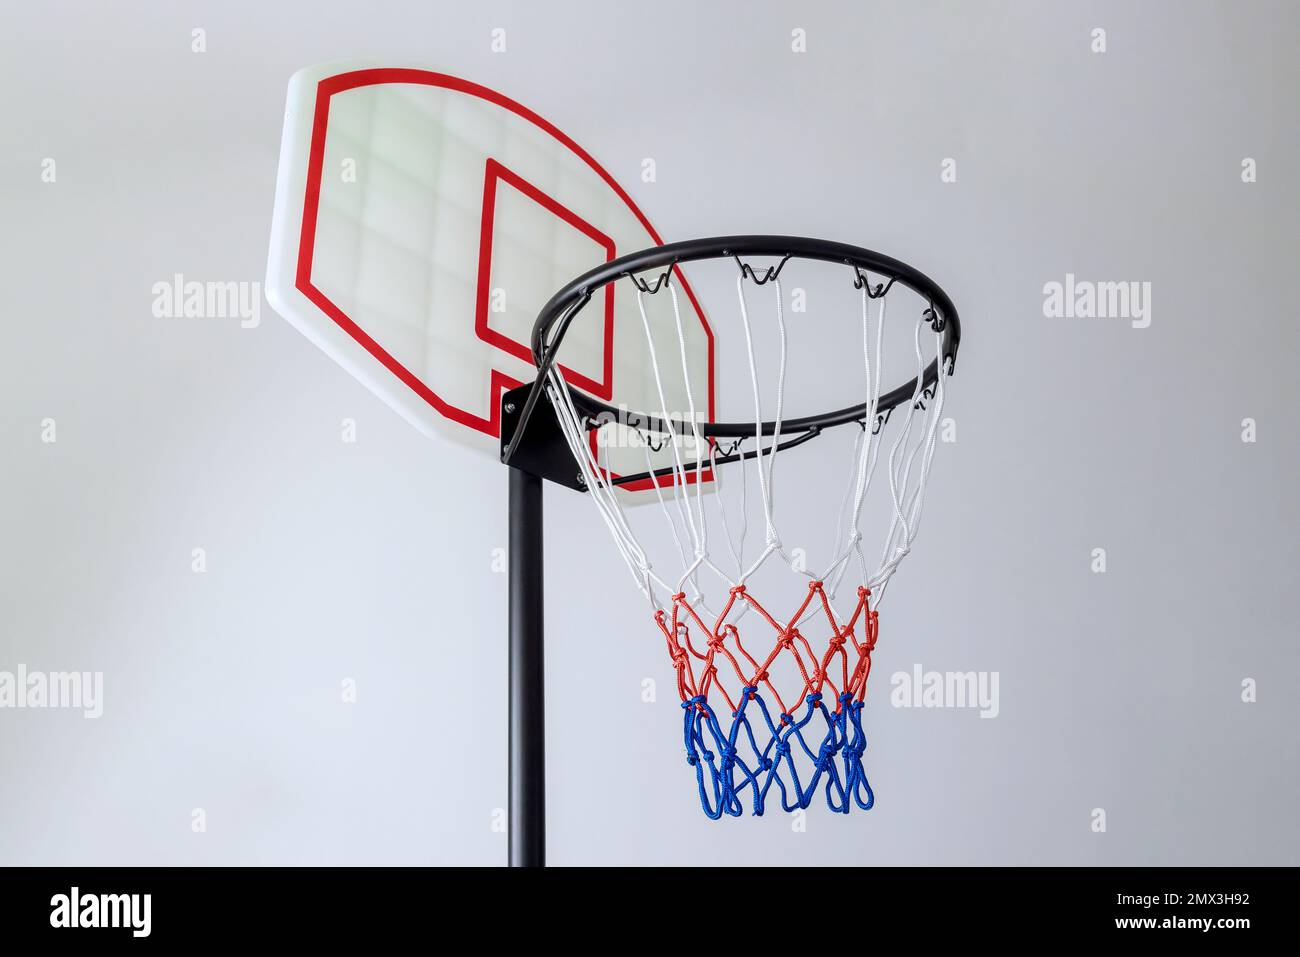 Isolated on white background is basketball basket hoop with rim and net Stock Photo